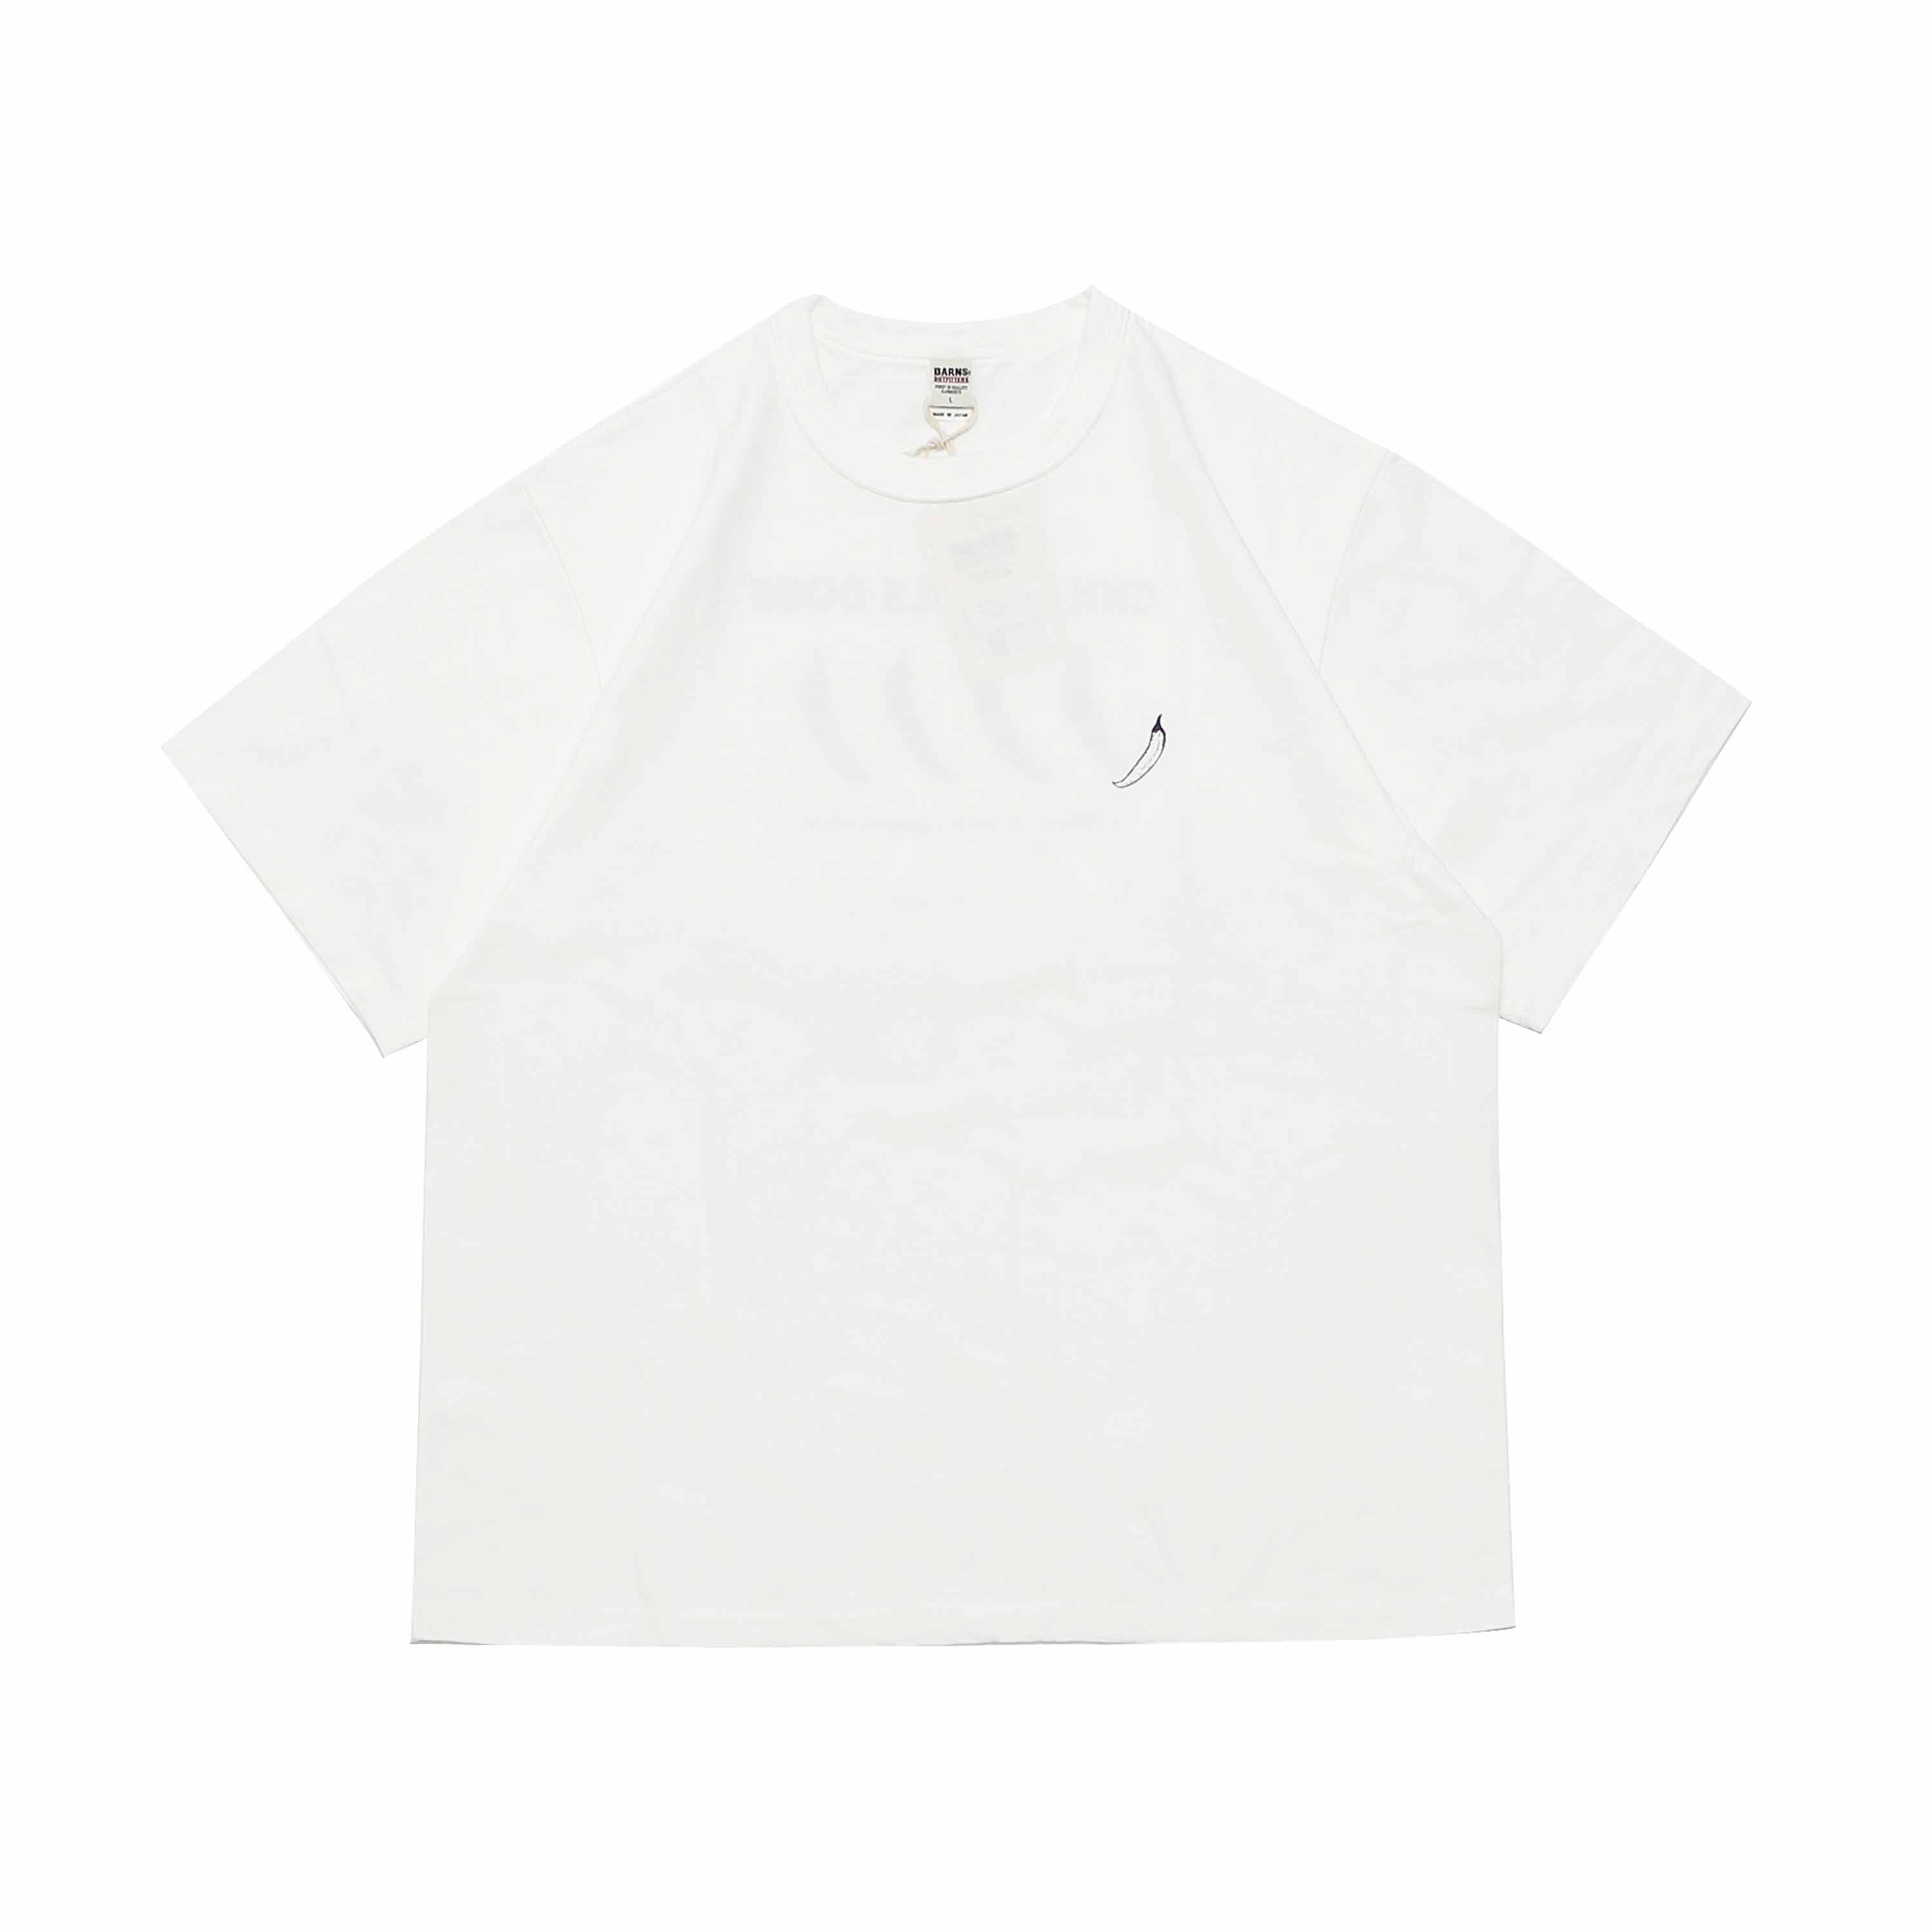 TOUGH-NECK S/S PRINTED TEE - CHILI BOWLS DOGS WHITE(BR-22127)